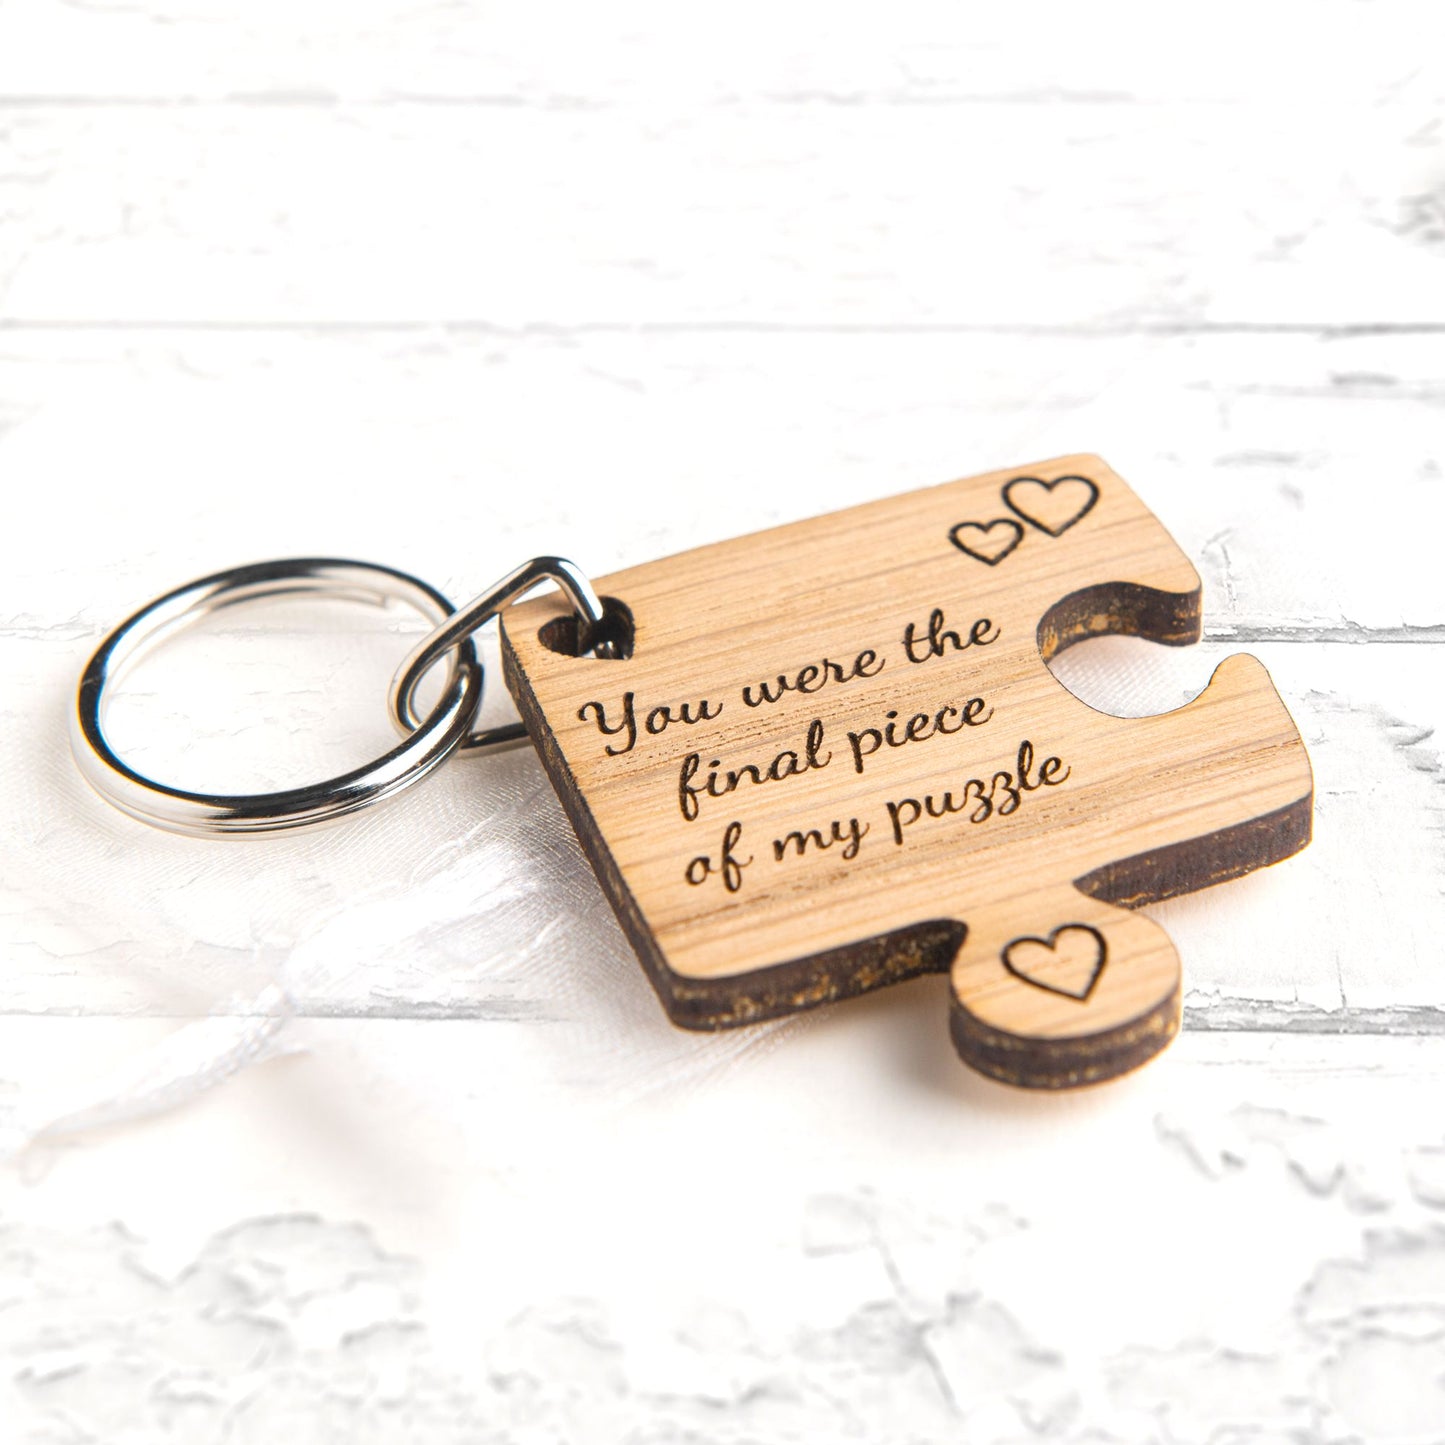 You WERE The FINAL Piece Of My Puzzle - Jigsaw Keyring Valentines Day Gift